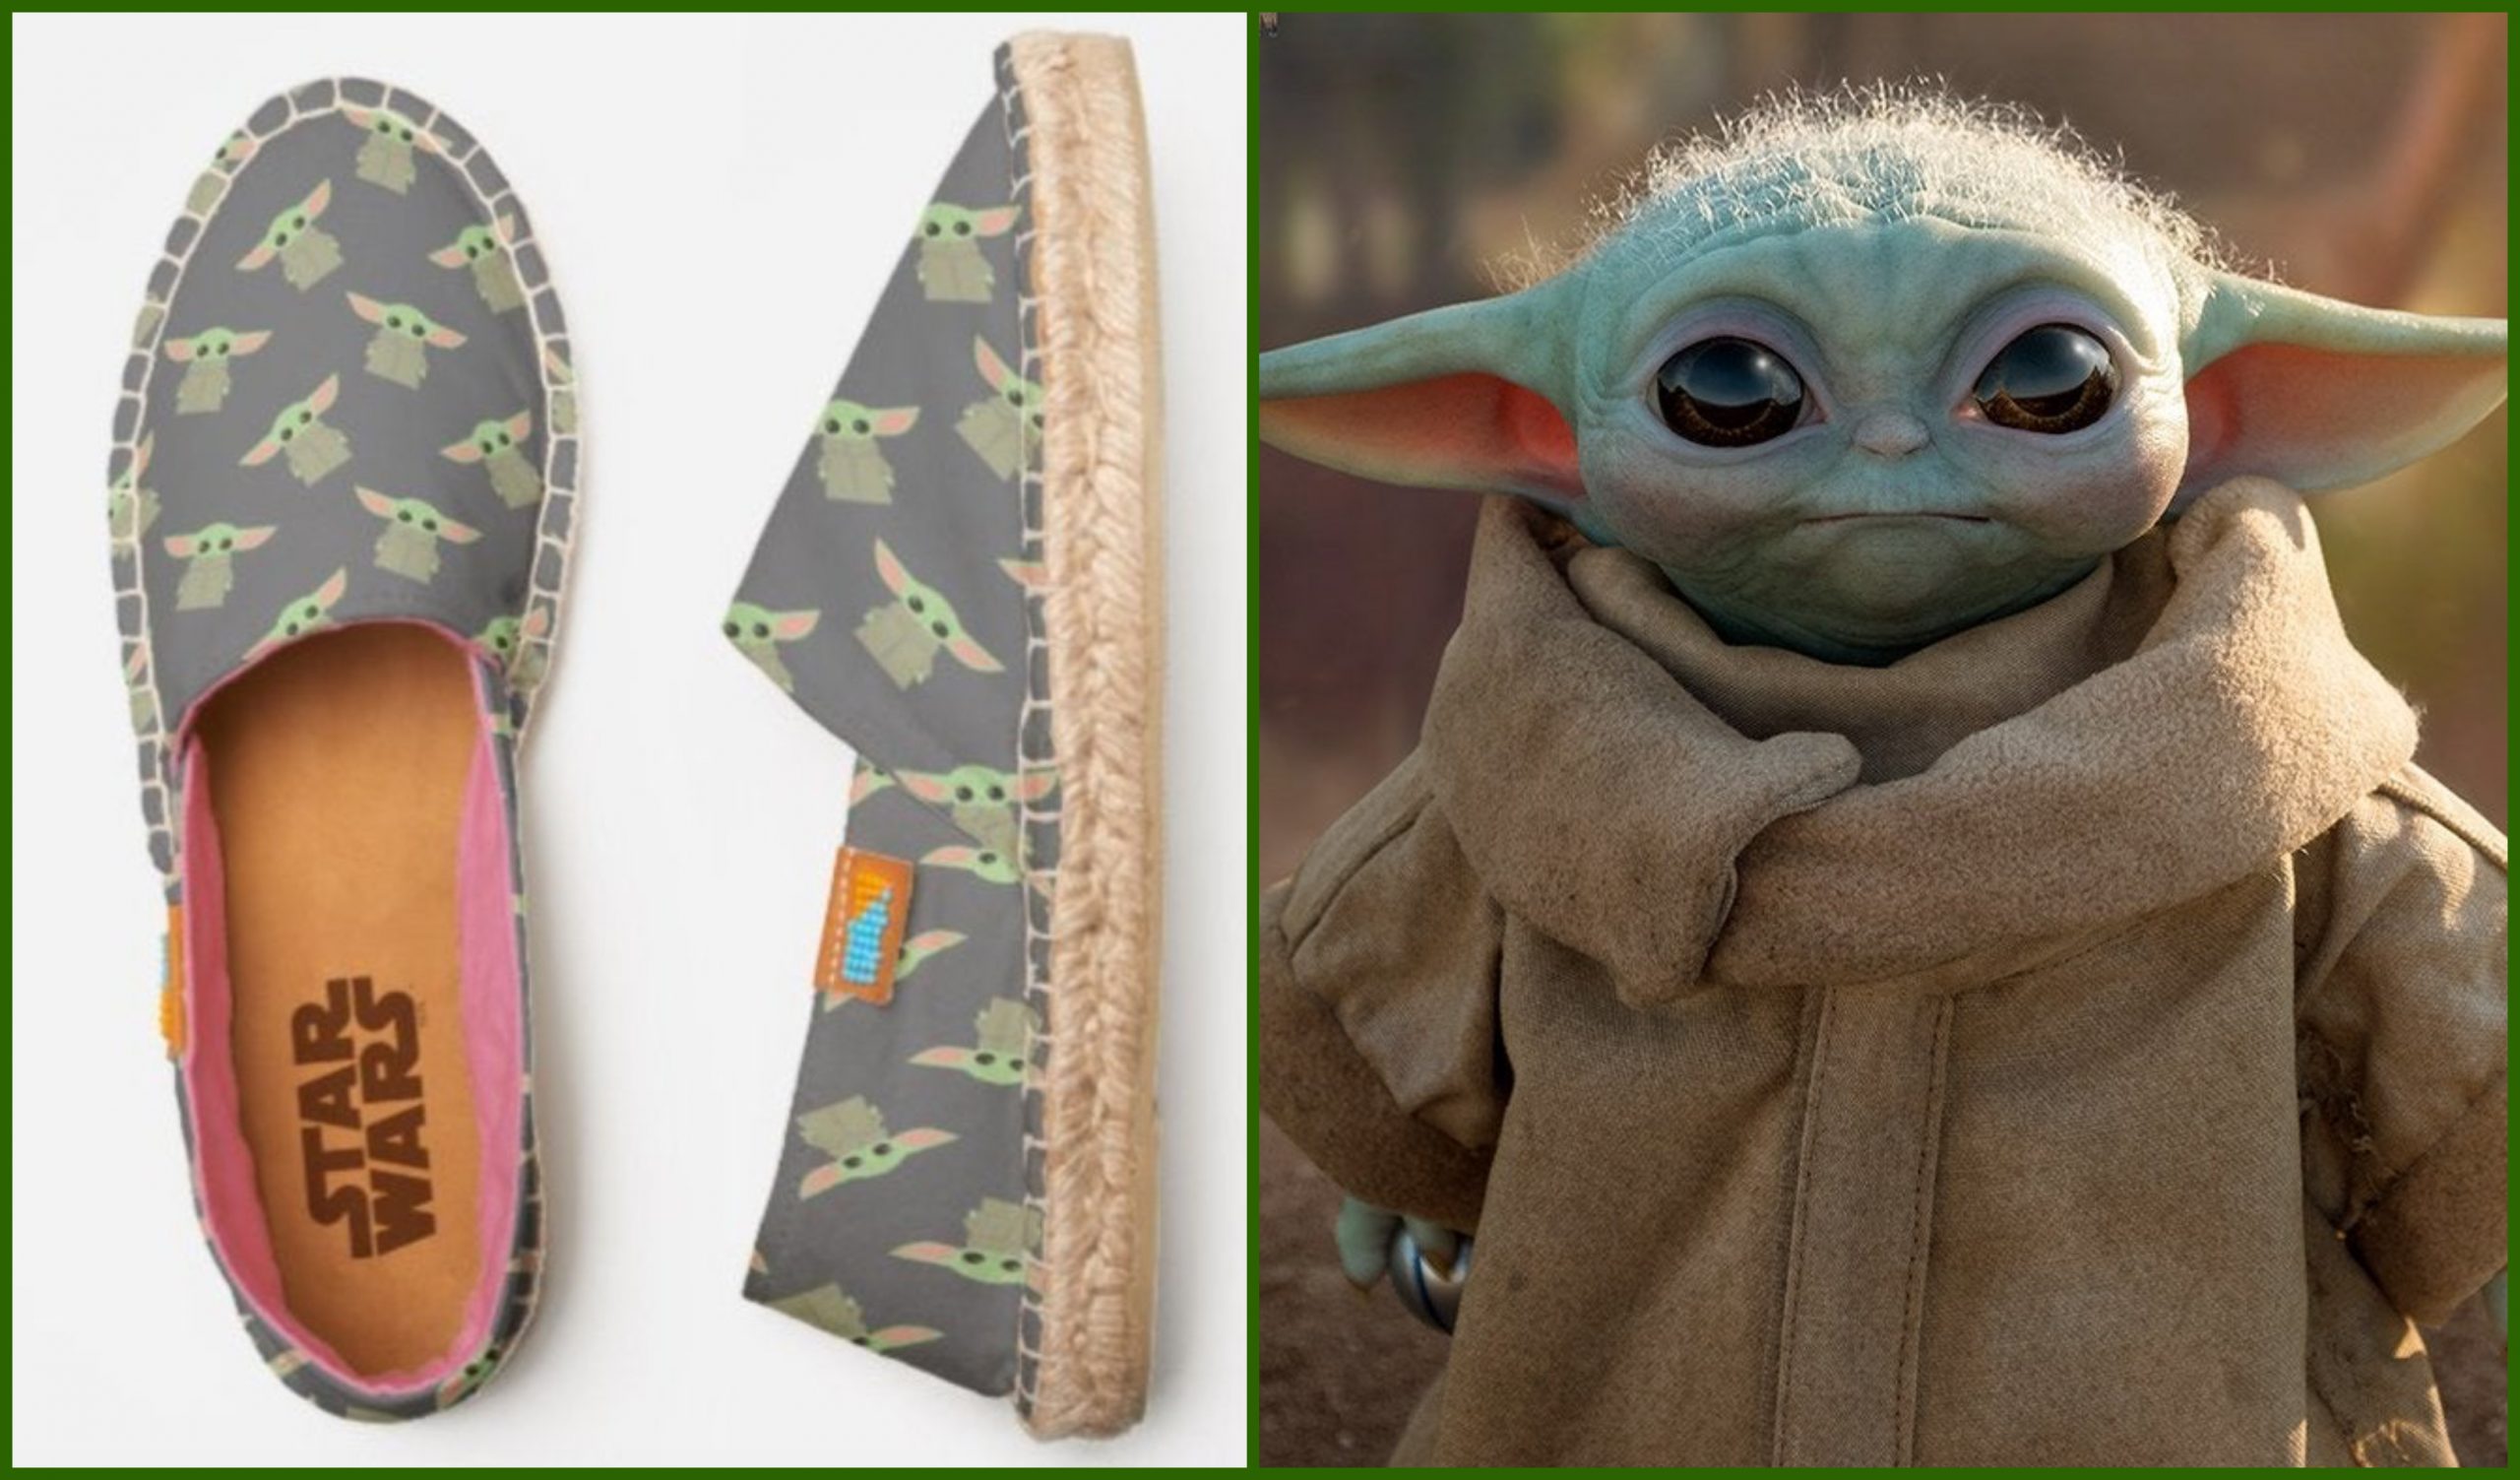 Disney Releases New “Baby Yoda” Shoes and Life-Sized Figurine